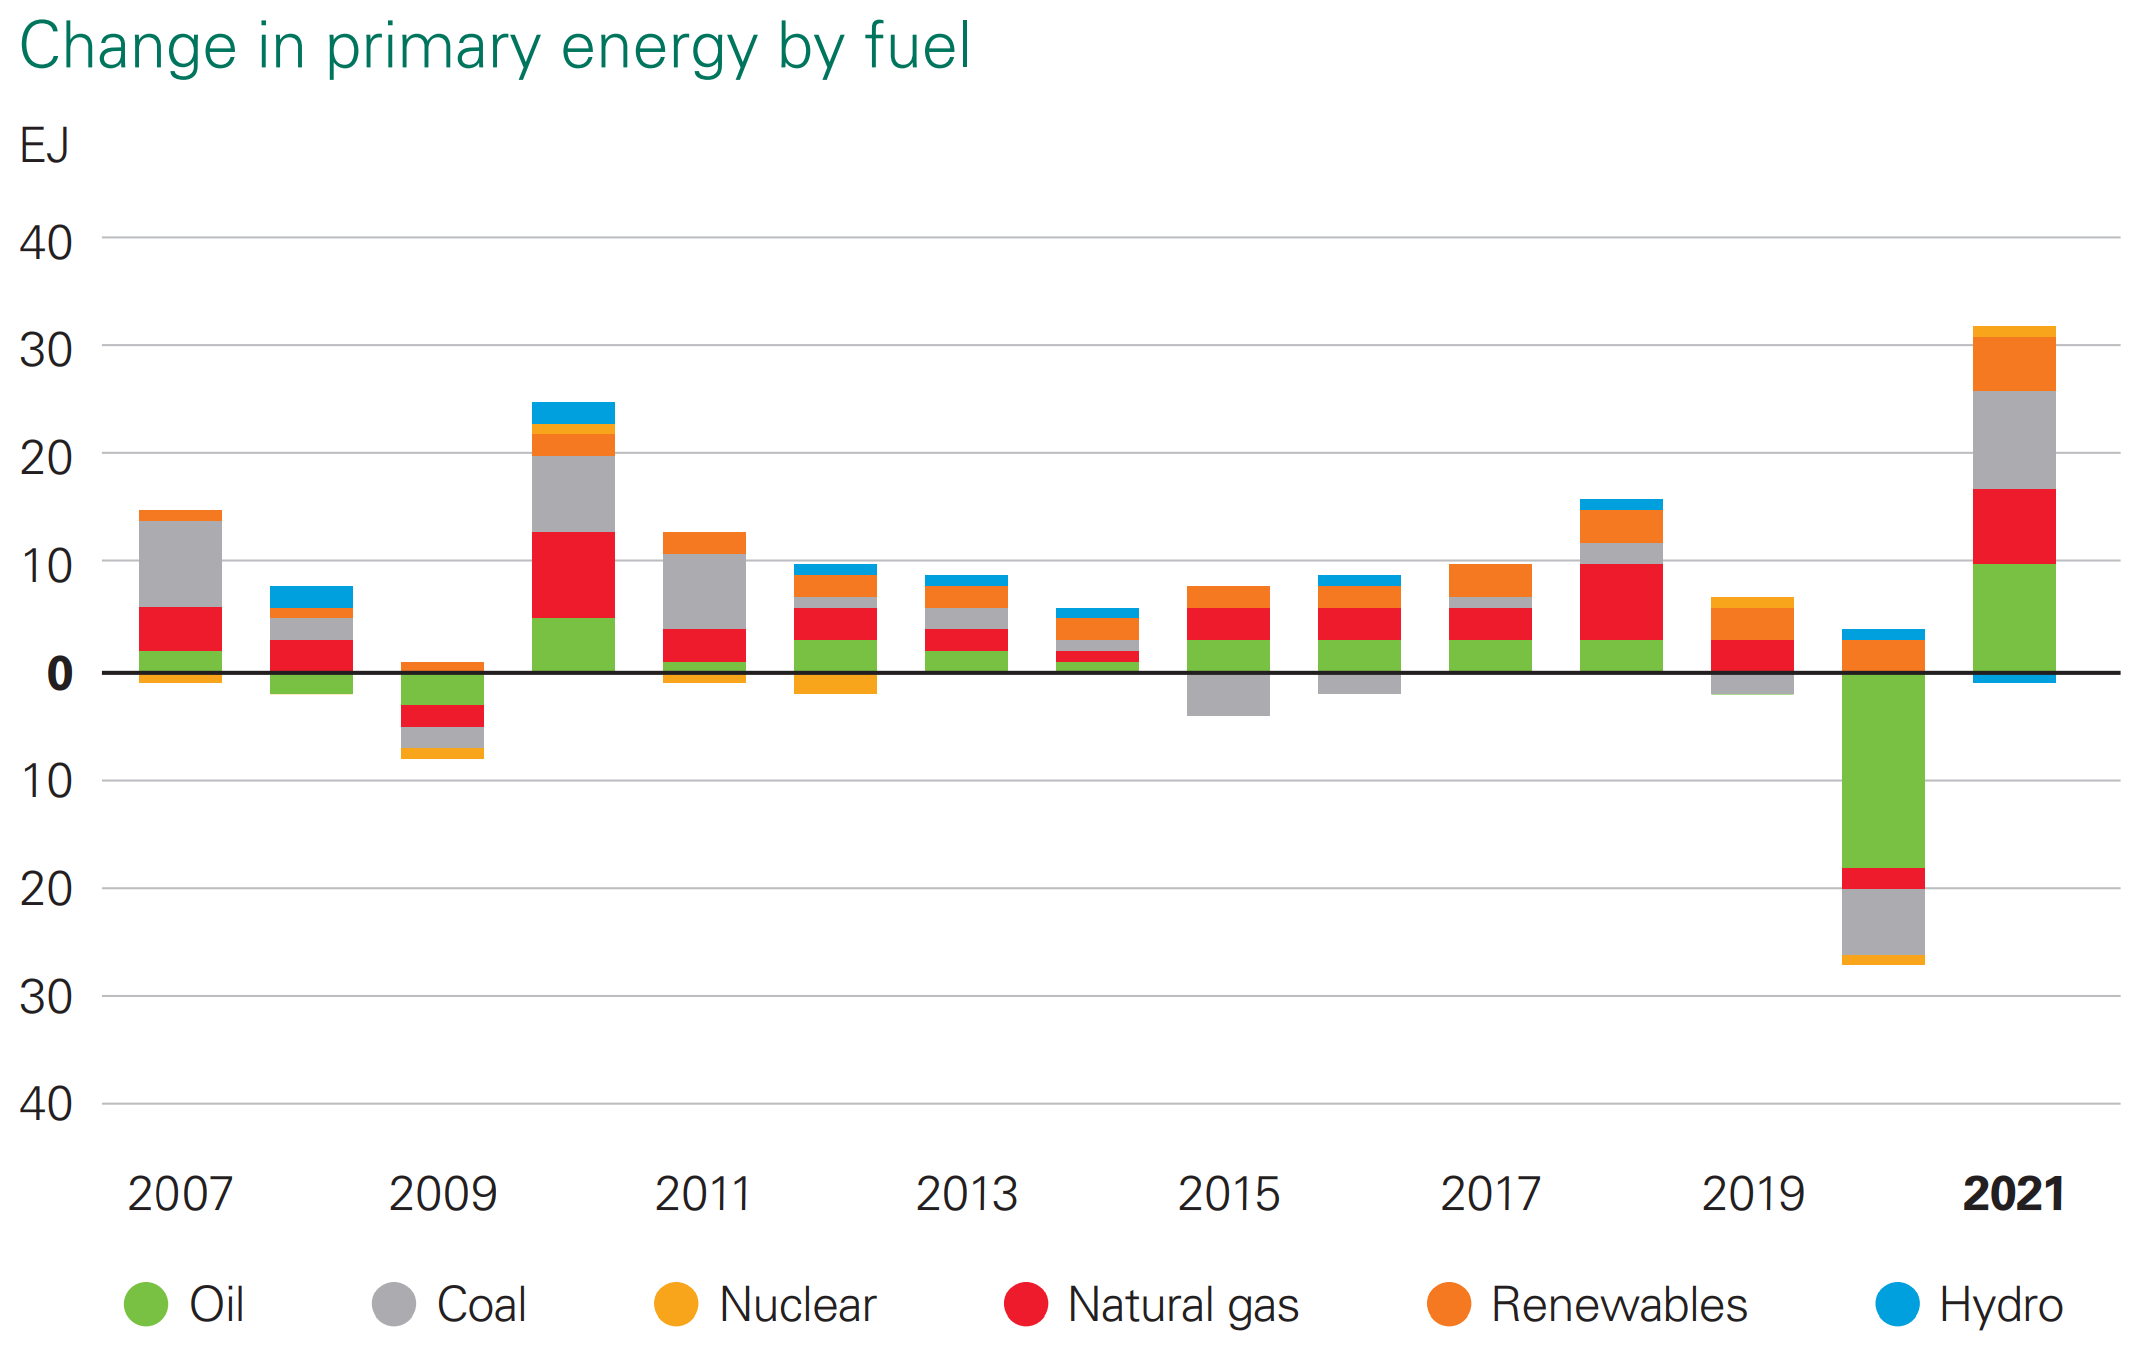 Change in primary energy by fuel, 2007-2021. Primary energy in 2021 grew by its largest amount in history, with emerging economies accounting for most of the increase. Primary energy grew by 31 exajoules (EJ) in 2021, the largest increase in history and more than reversing the sharp decline seen in 2020. Primary energy in 2021 was 8 EJ above 2019 levels. The increase in primary energy in 2021 was driven by emerging economies, which increased by 13 EJ, with China expanding by 10 EJ. Taking 2020 and 2021 together, primary energy consumption in emerging economies increased by 15 EJ, largely reflecting growth in China (13 EJ). In contrast, energy demand in developed economies in 2021 was 7 EJ below 2019 levels. The increase in primary energy between 2019 and 2021 was entirely driven by renewable energy sources. The level of fossil fuel energy consumption was unchanged between 2019 and 2021, with lower oil demand (-8 EJ) offset by higher natural gas (5 EJ) and coal (3 EJ) consumption. Graphic: BP